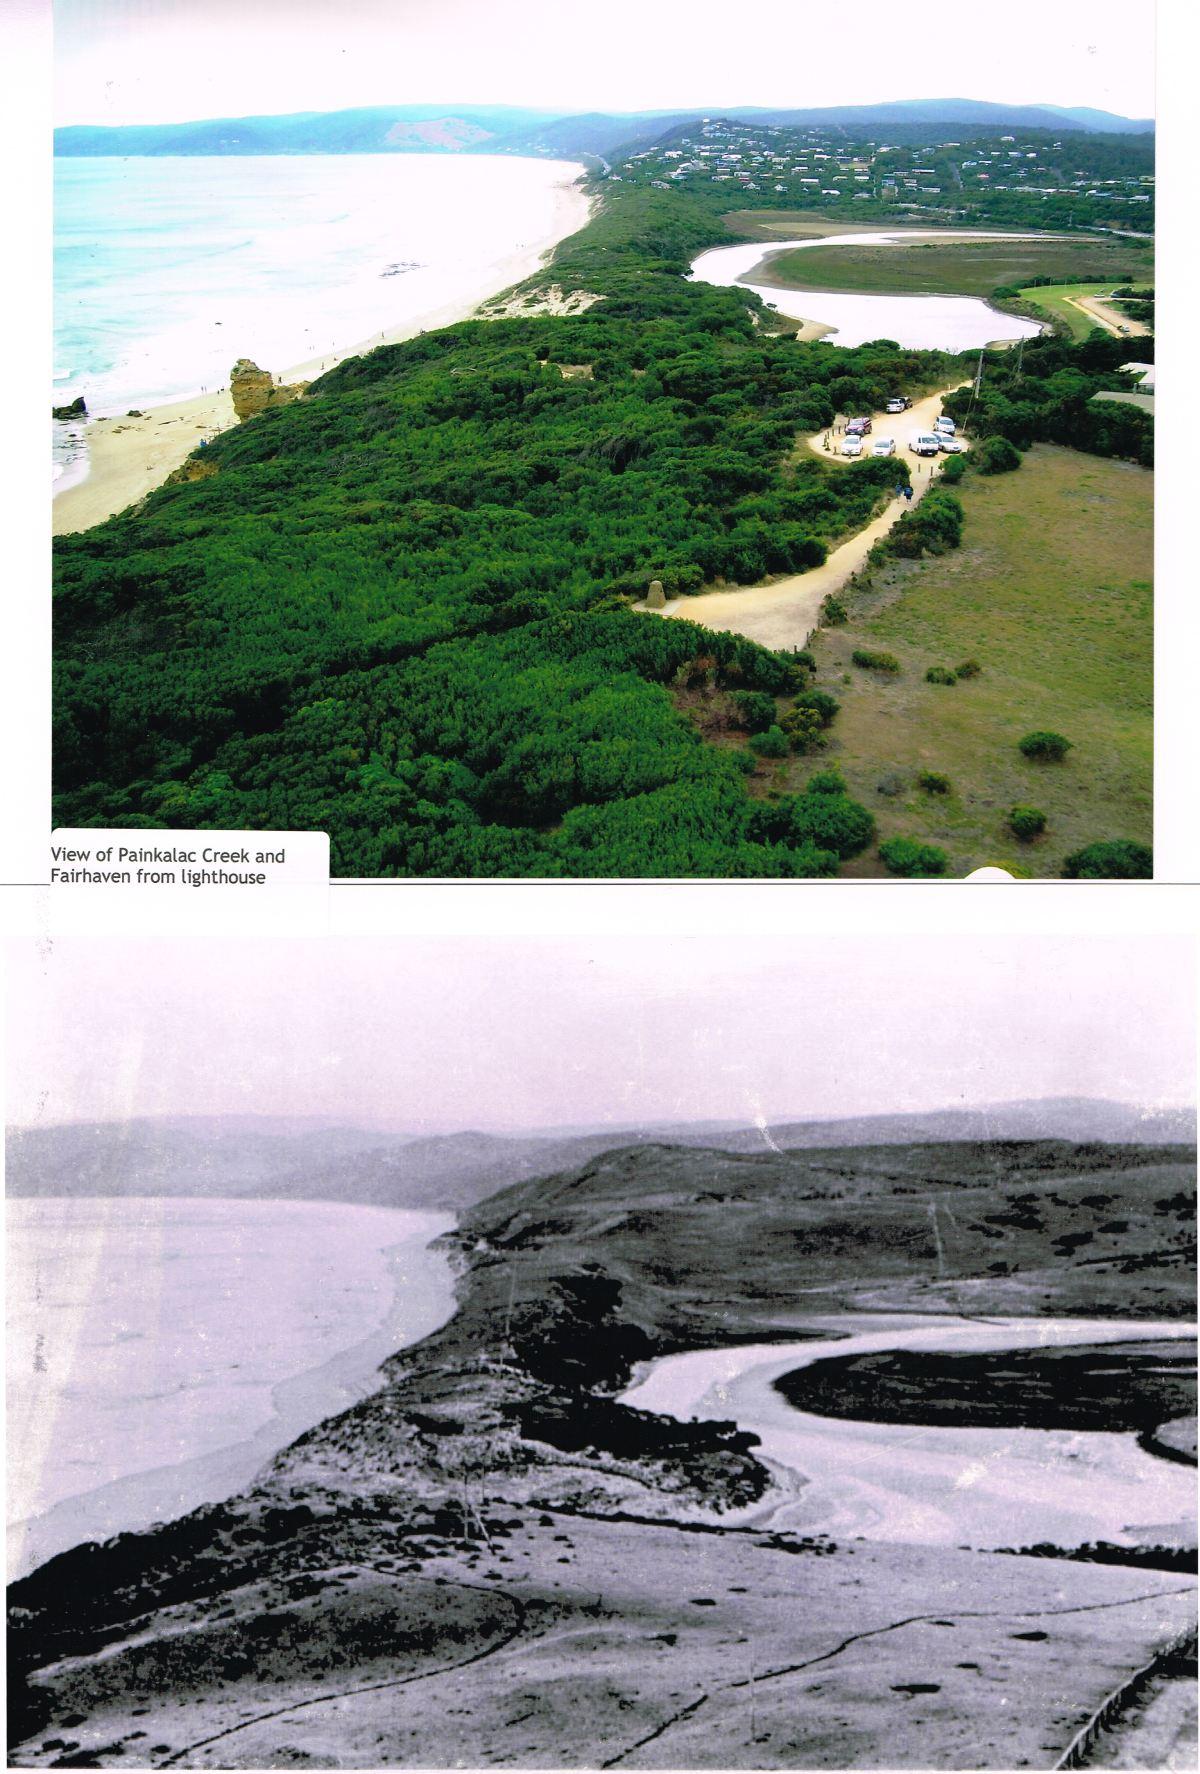 Painkalac Creek from the Lighthouse now and then